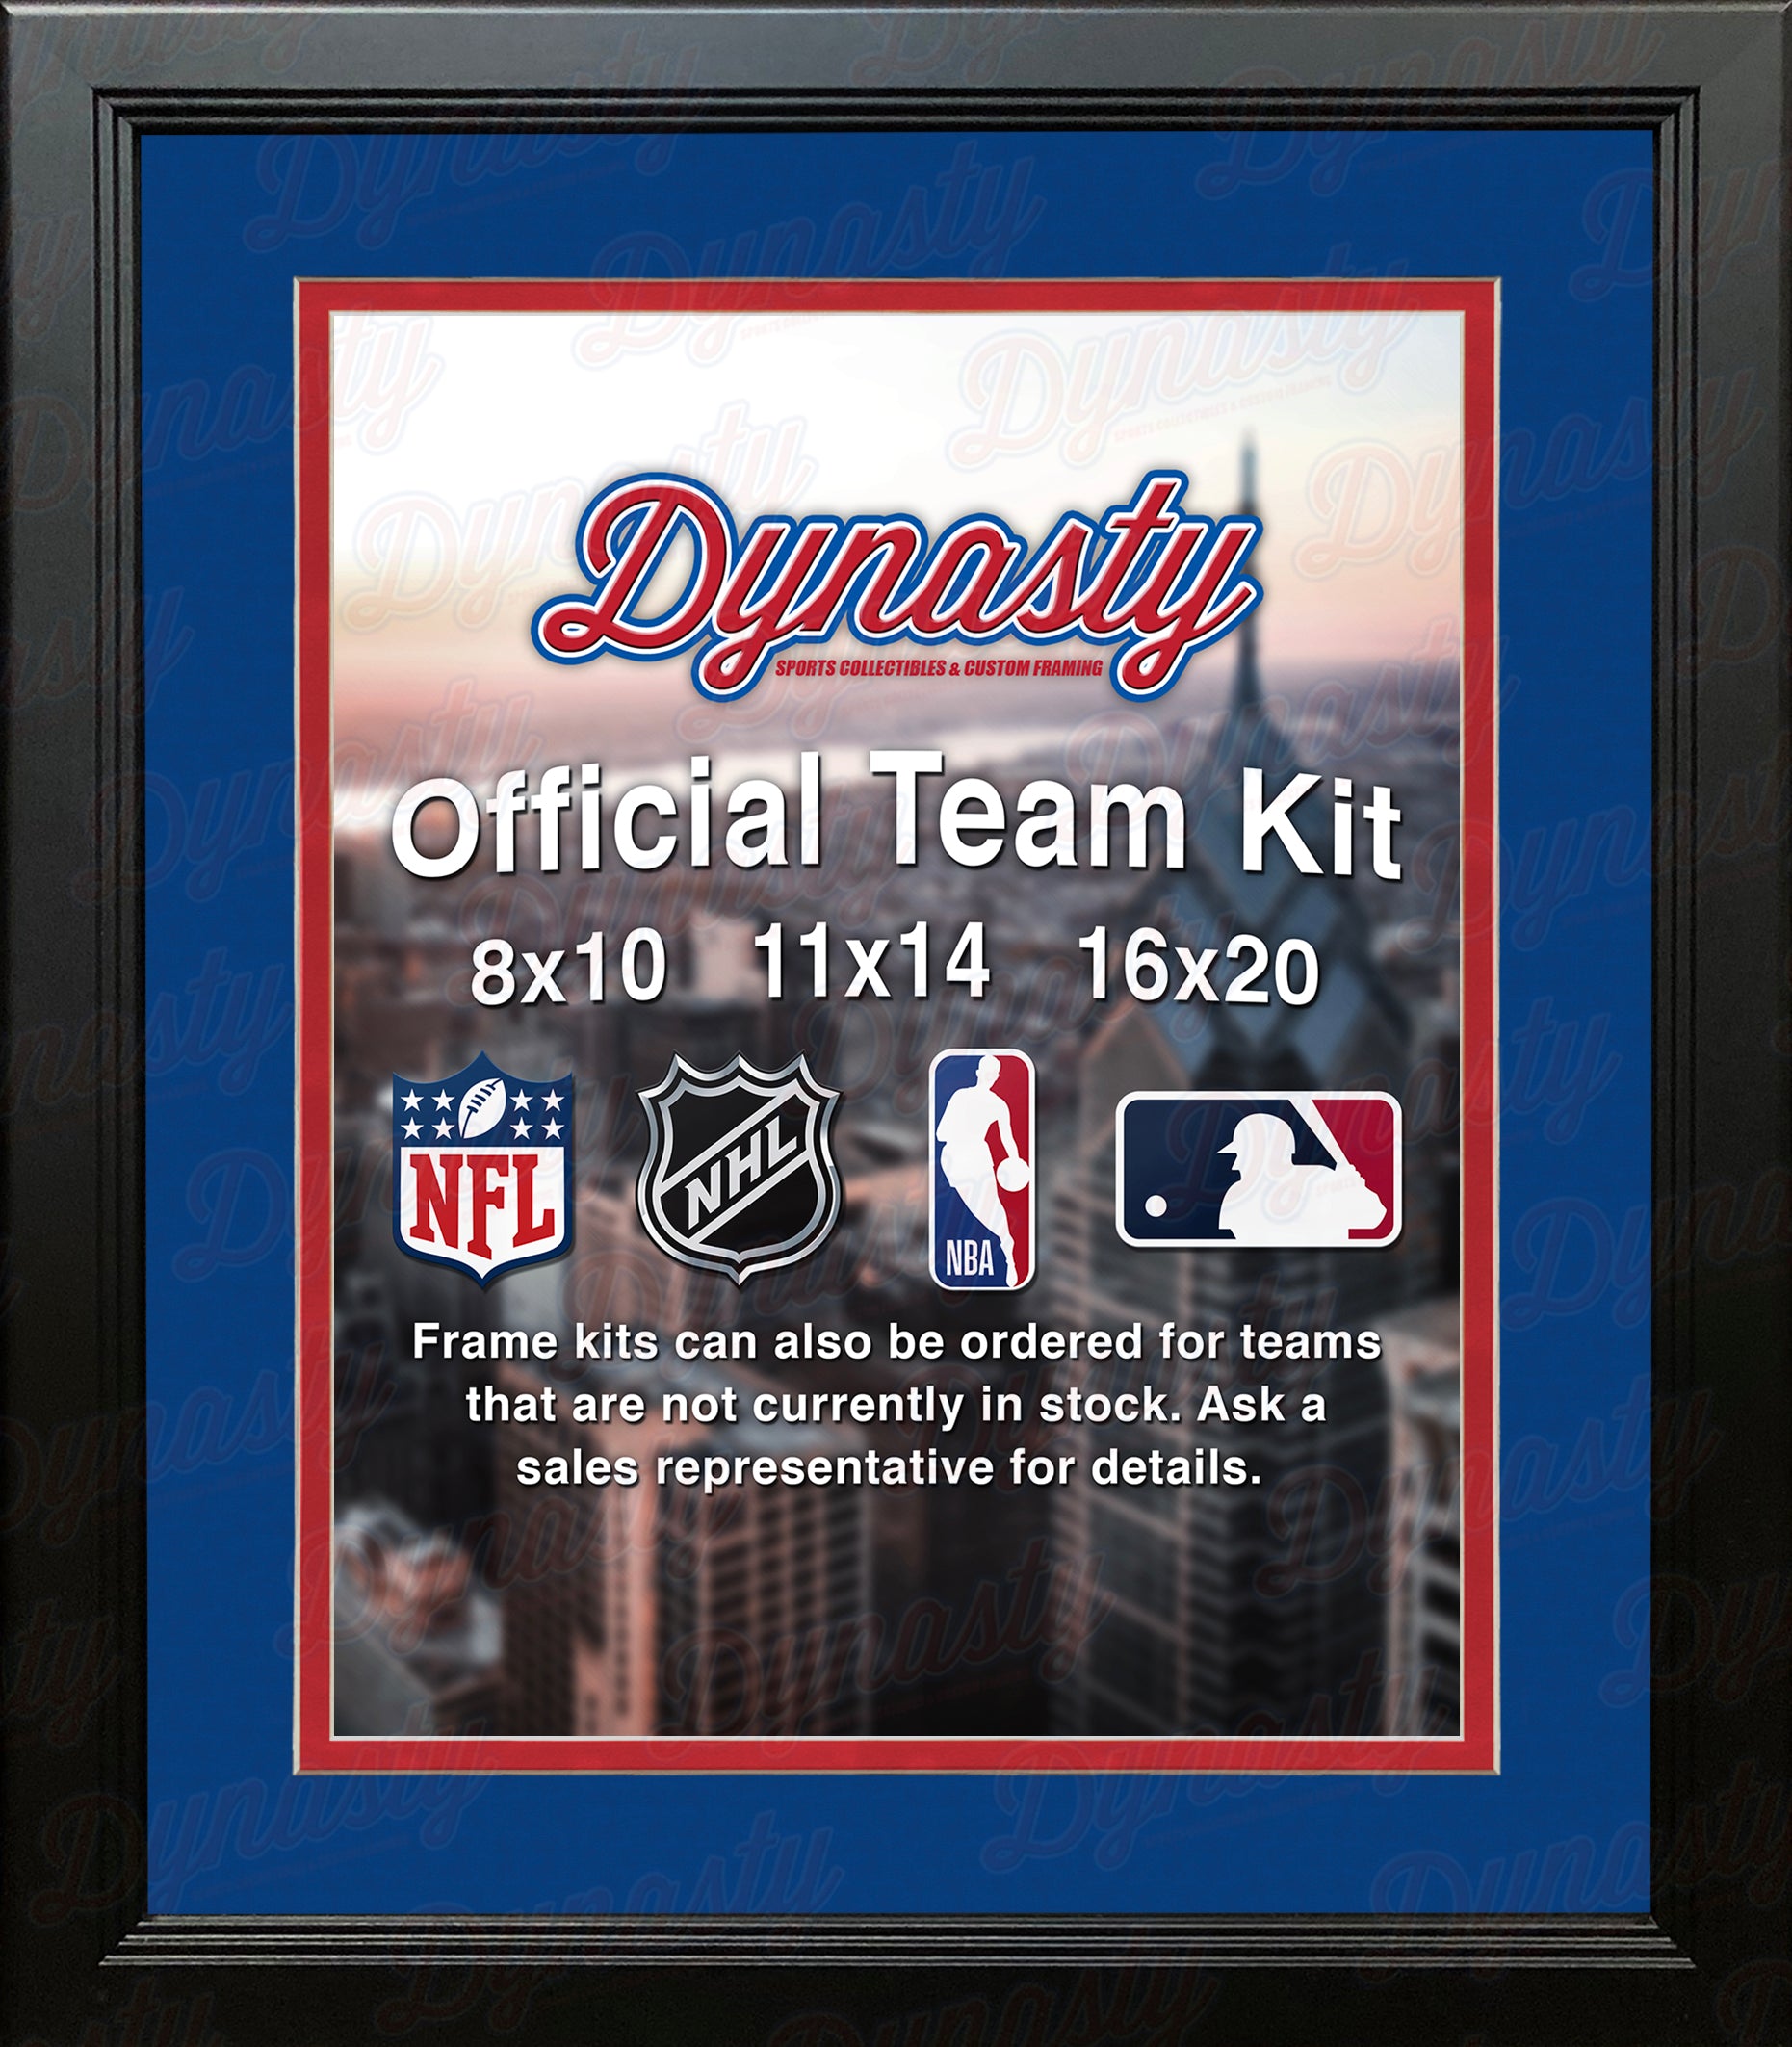 NBA Basketball Photo Picture Frame Kit - Los Angeles Clippers (Blue Matting, Red Trim) - Dynasty Sports & Framing 